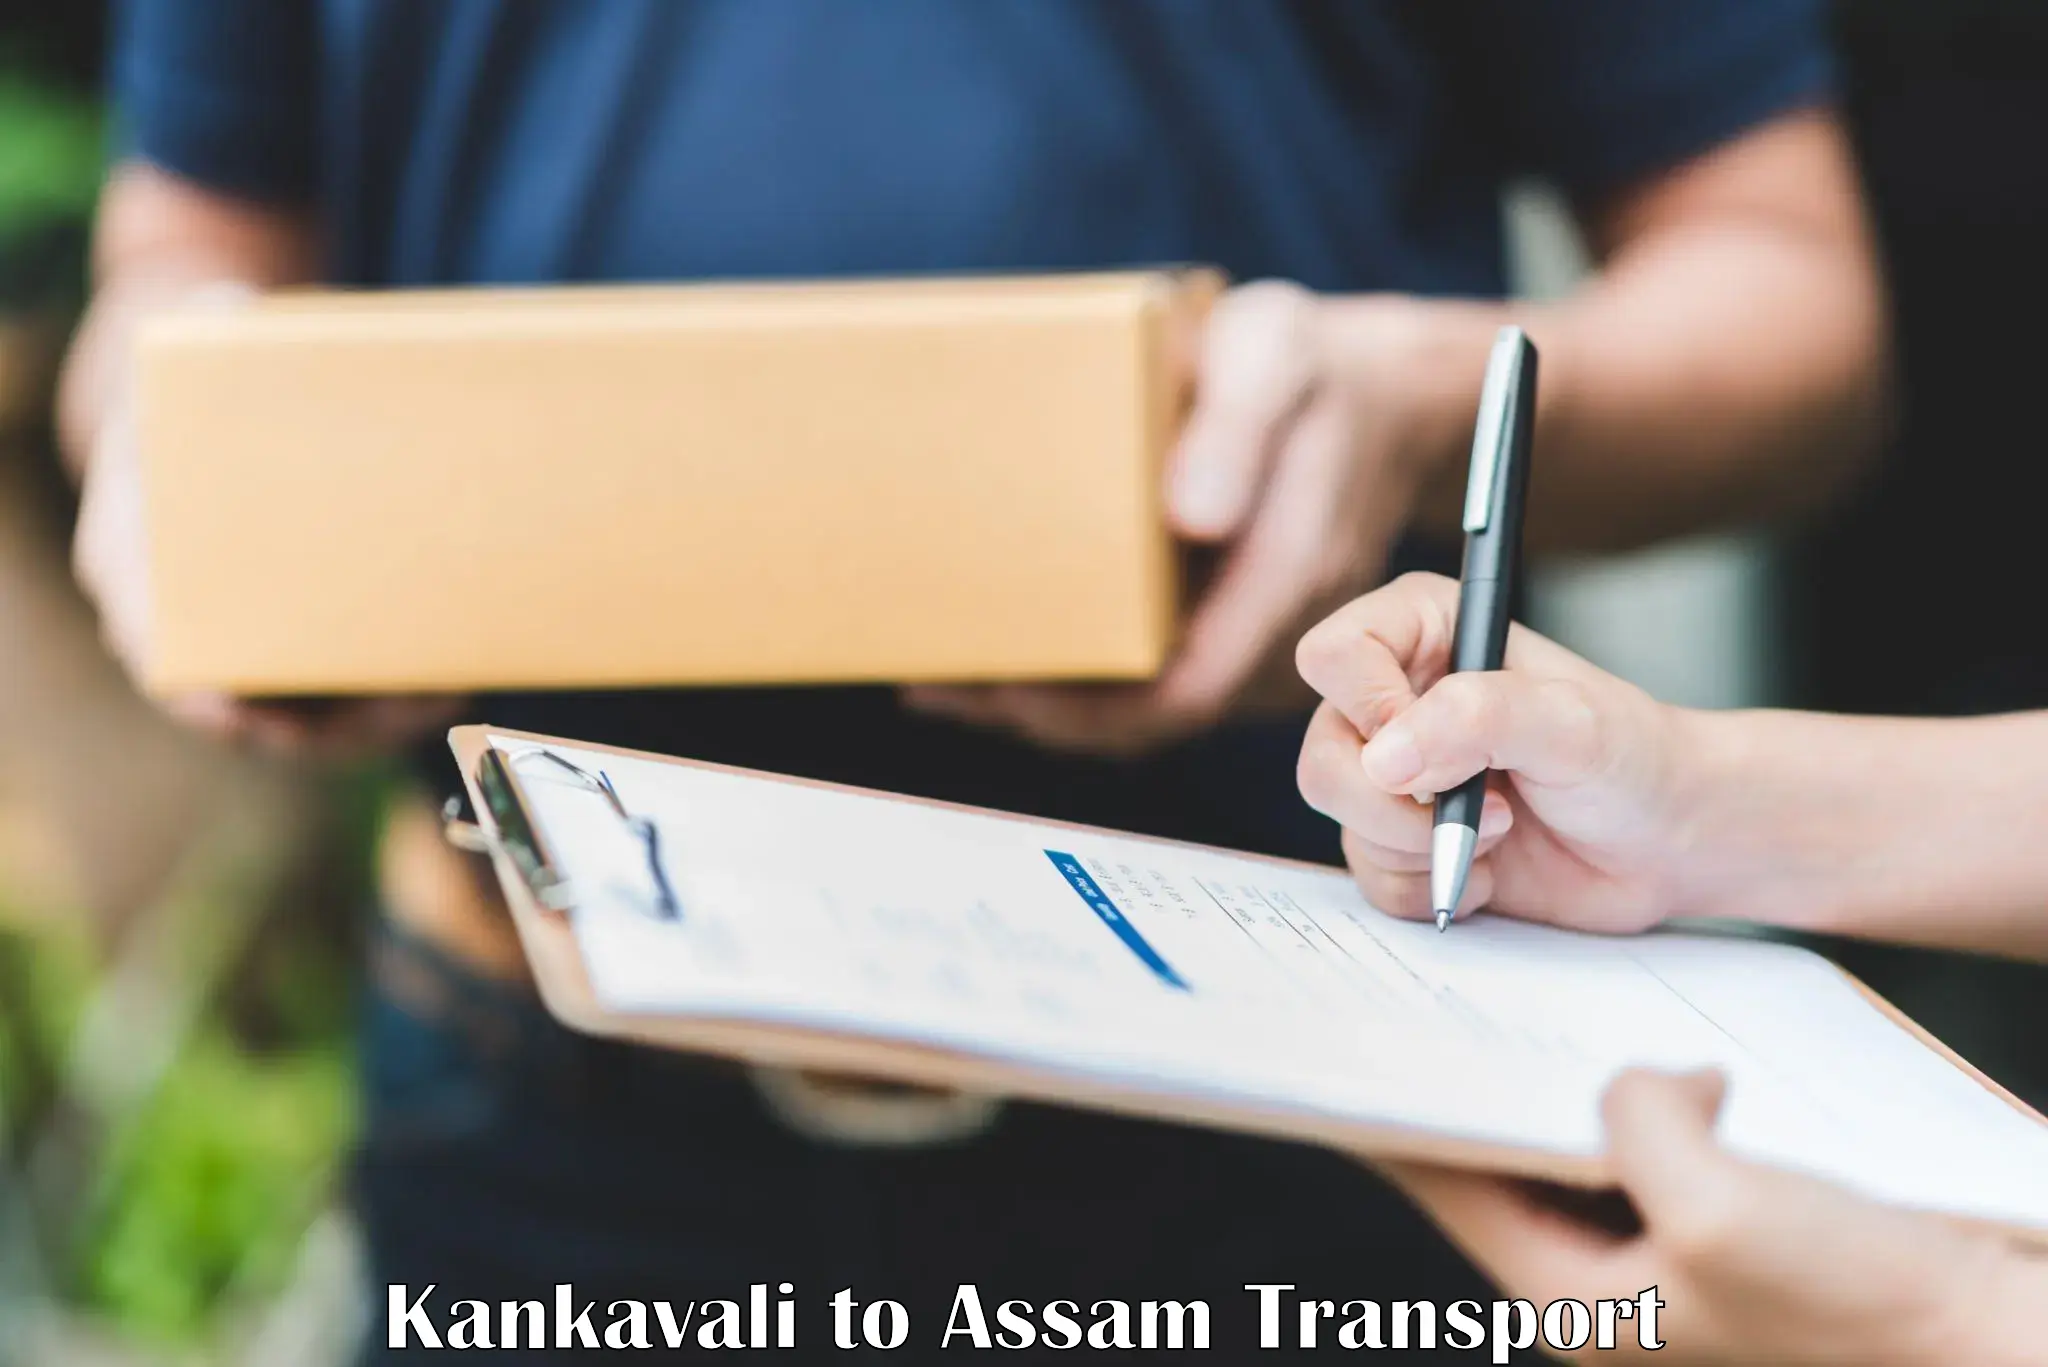 Transport in sharing in Kankavali to Assam